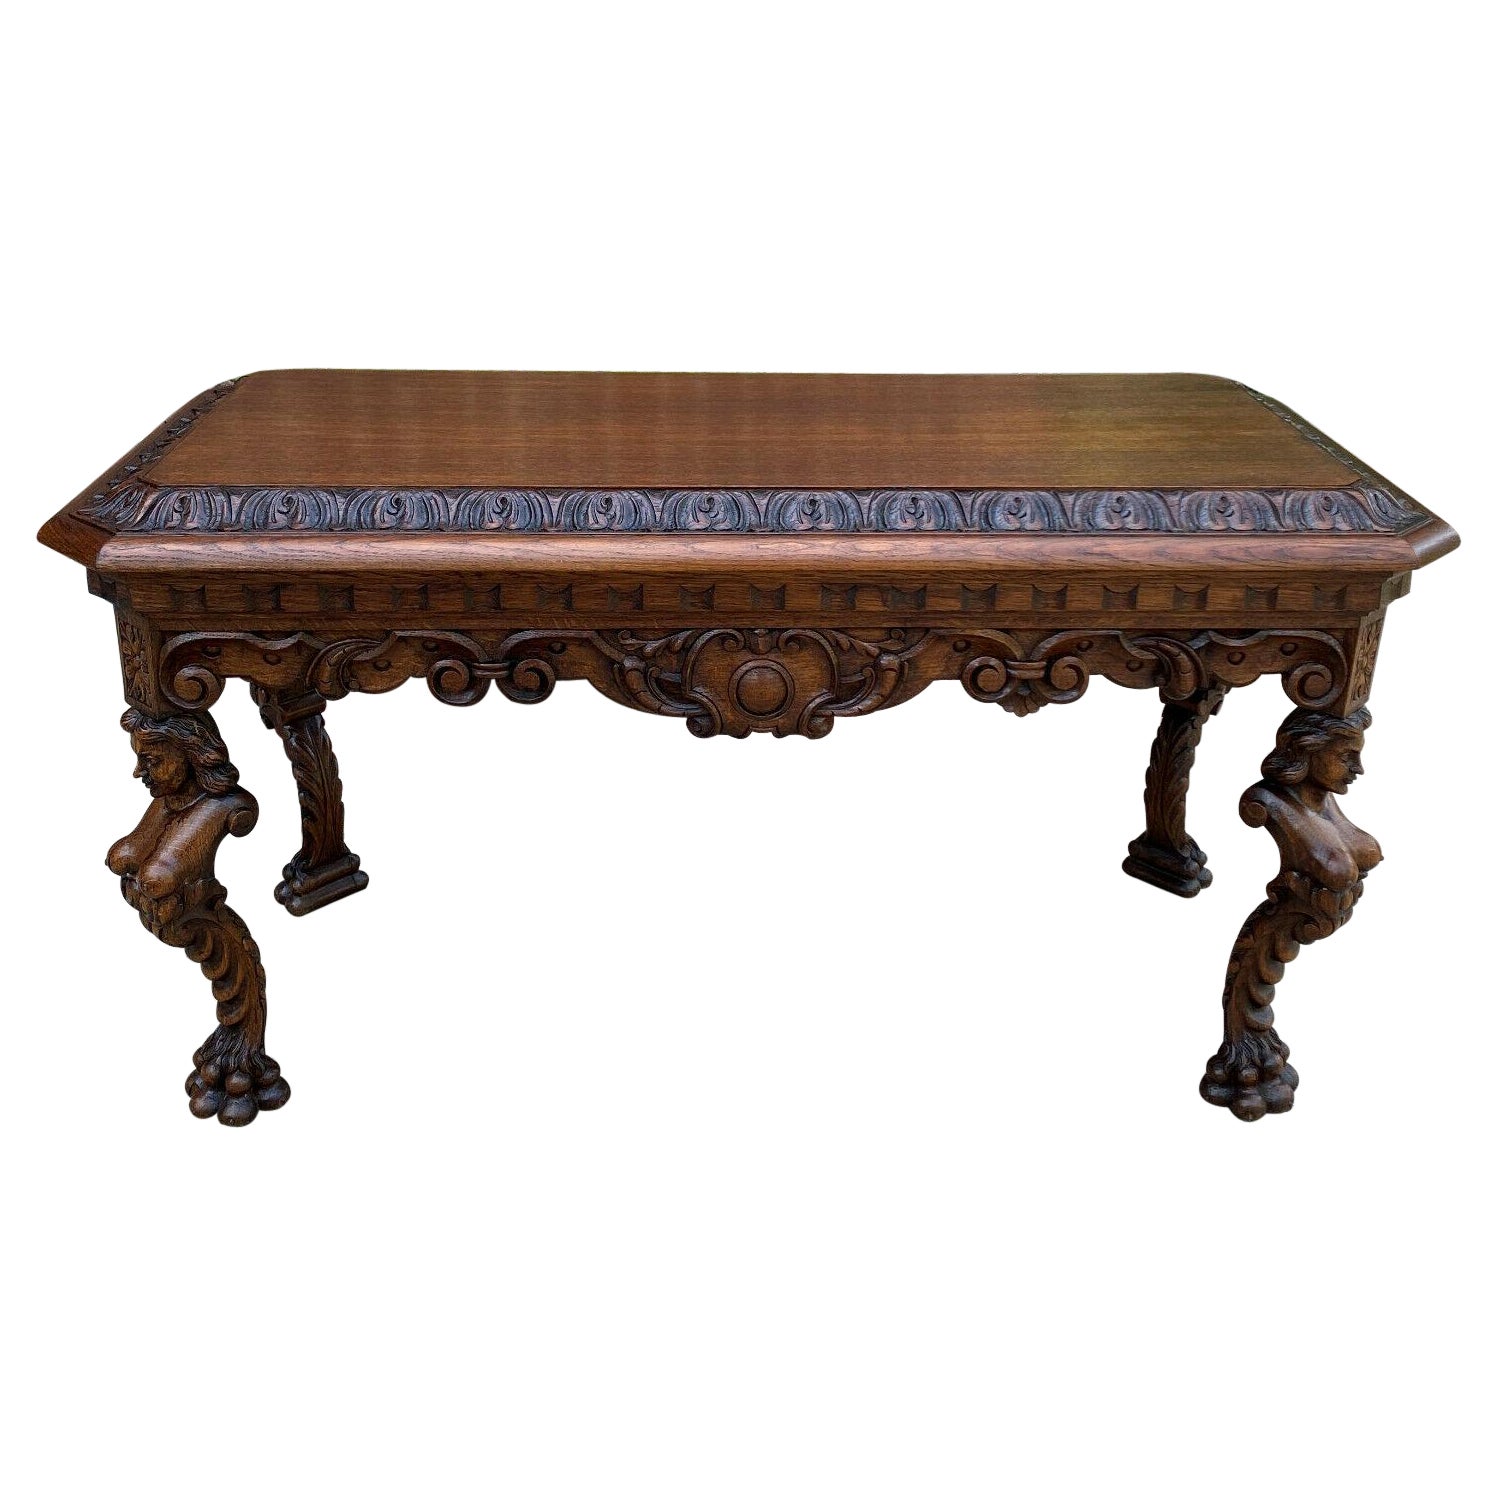 Antique French Coffee Table Paw Feet Renaissance Revival Bench Window Seat Oak For Sale